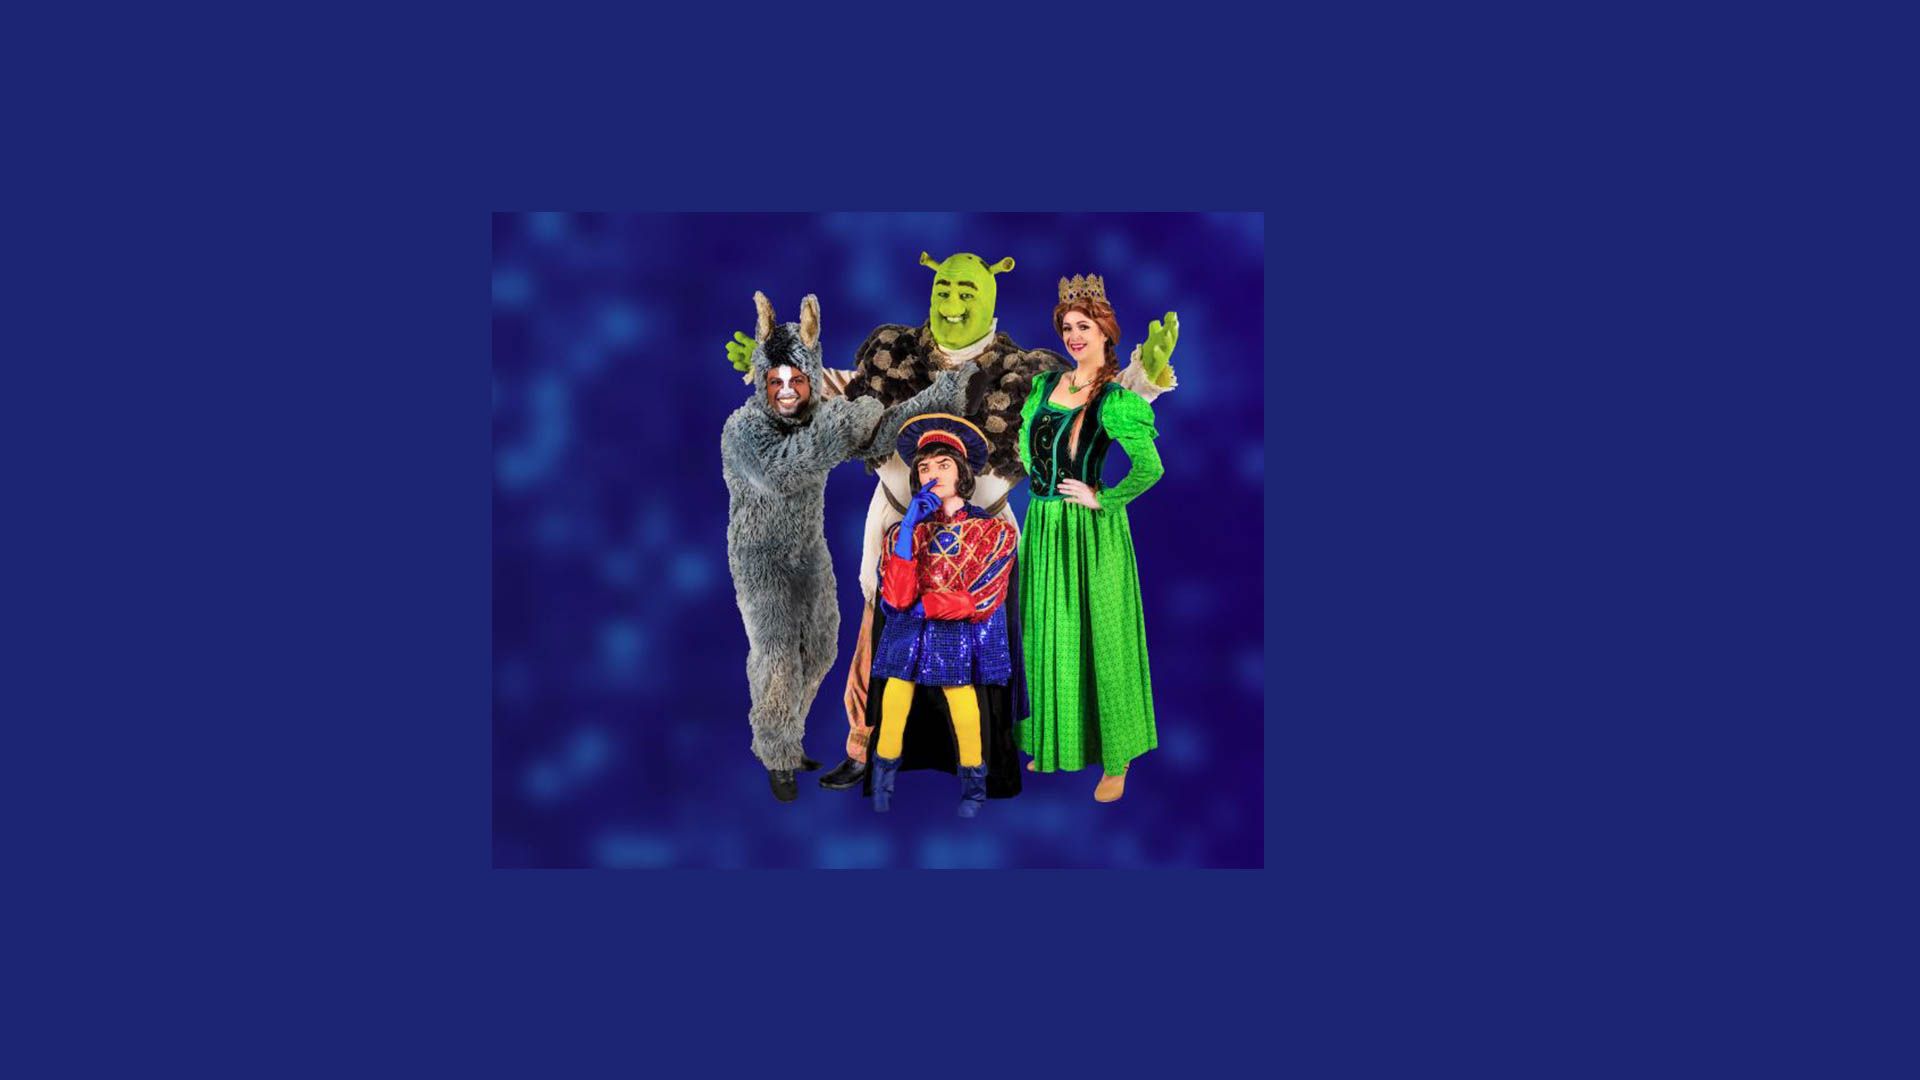 Shrek The Musical wowing Branson audiences